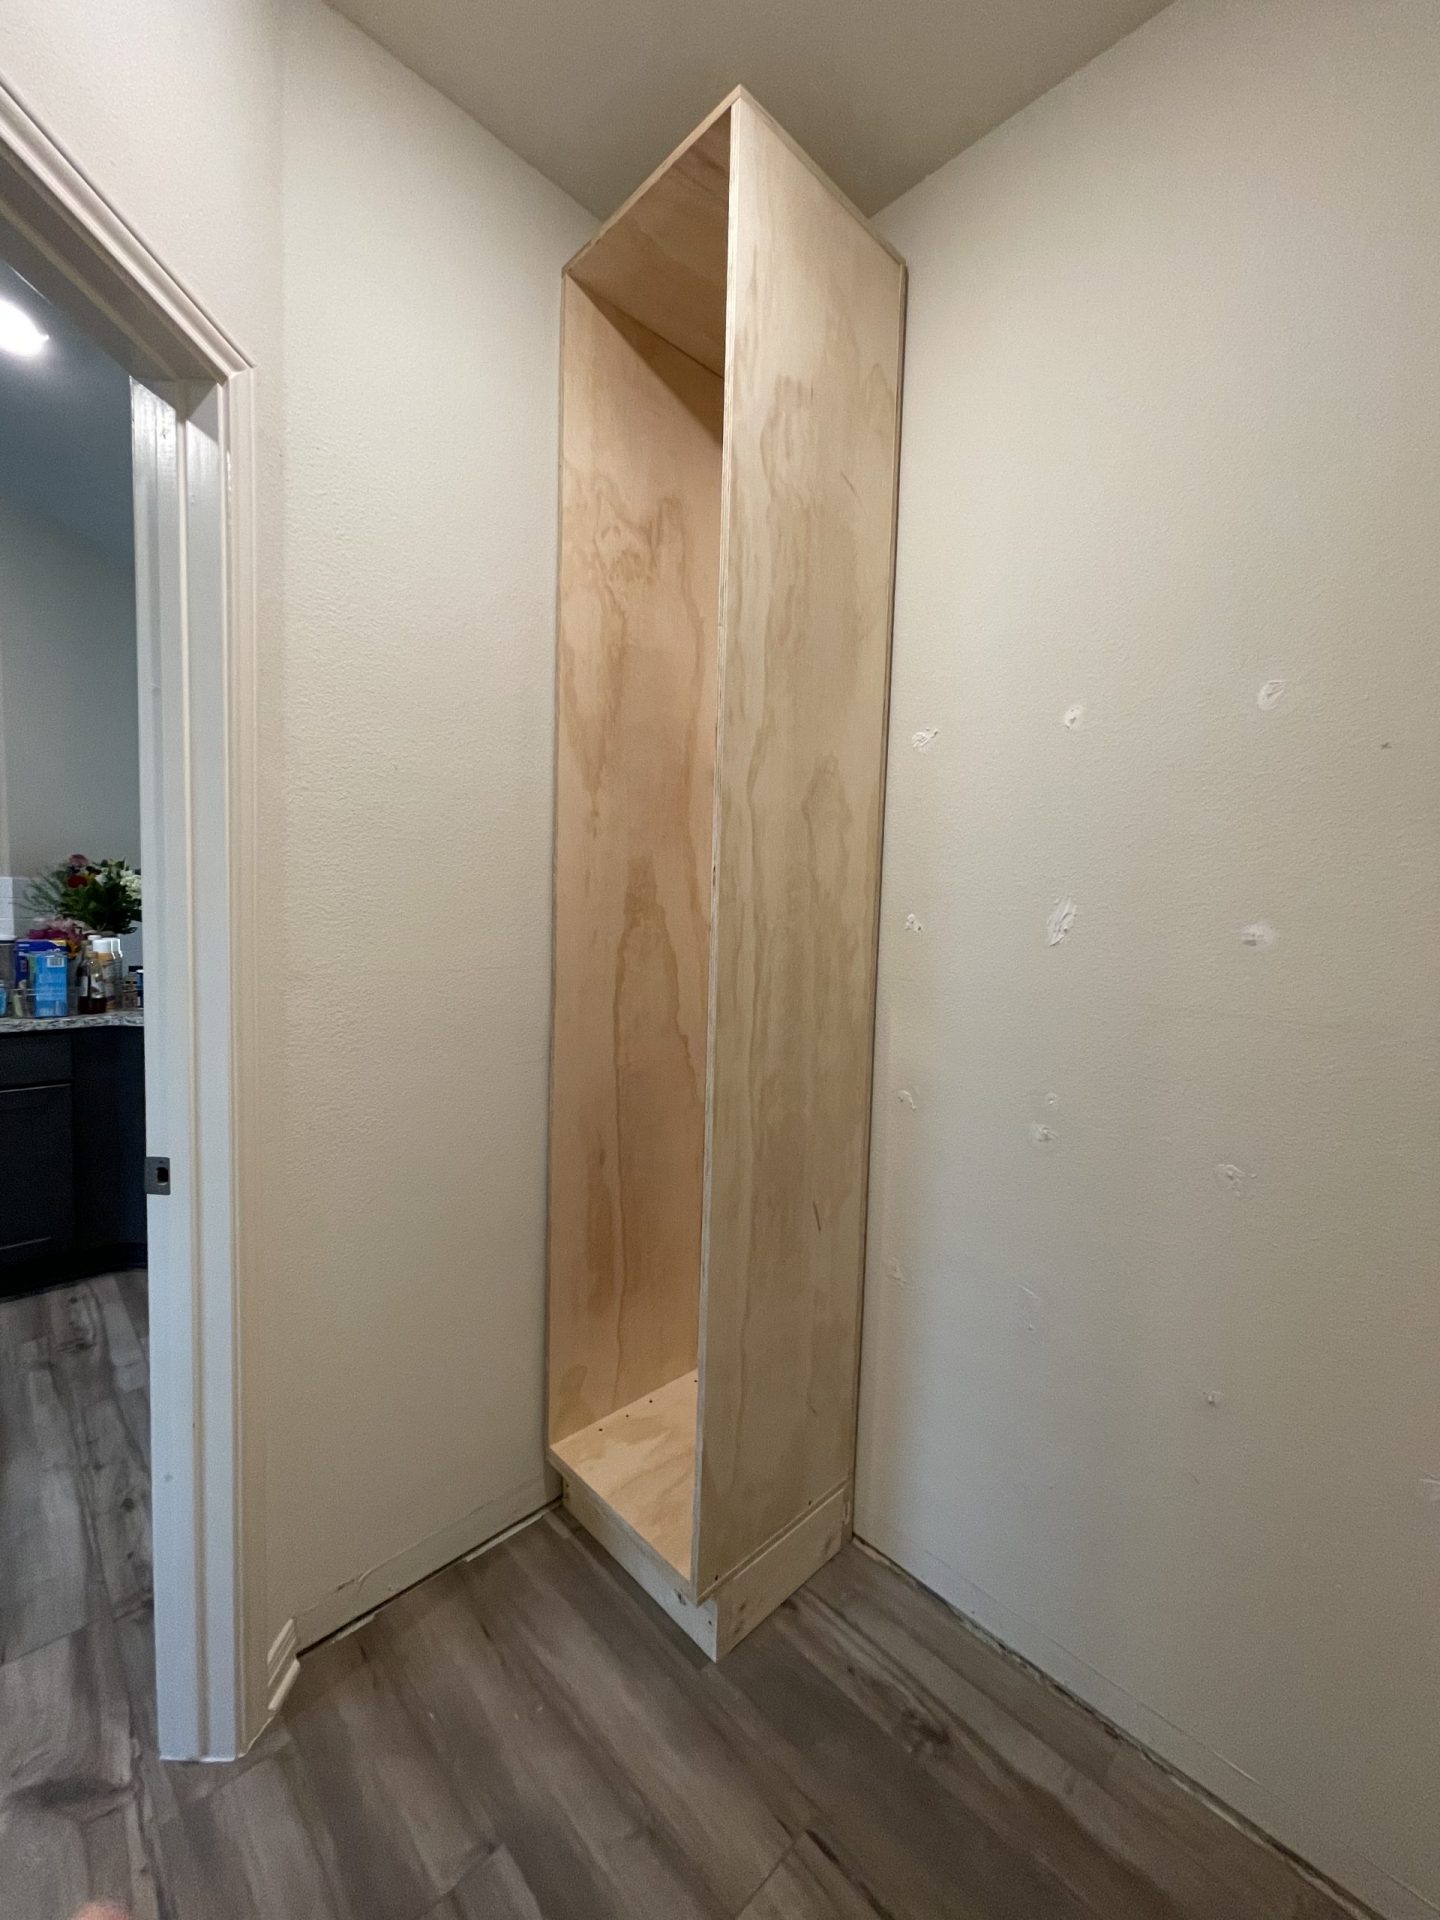 Cabinet in Pantry